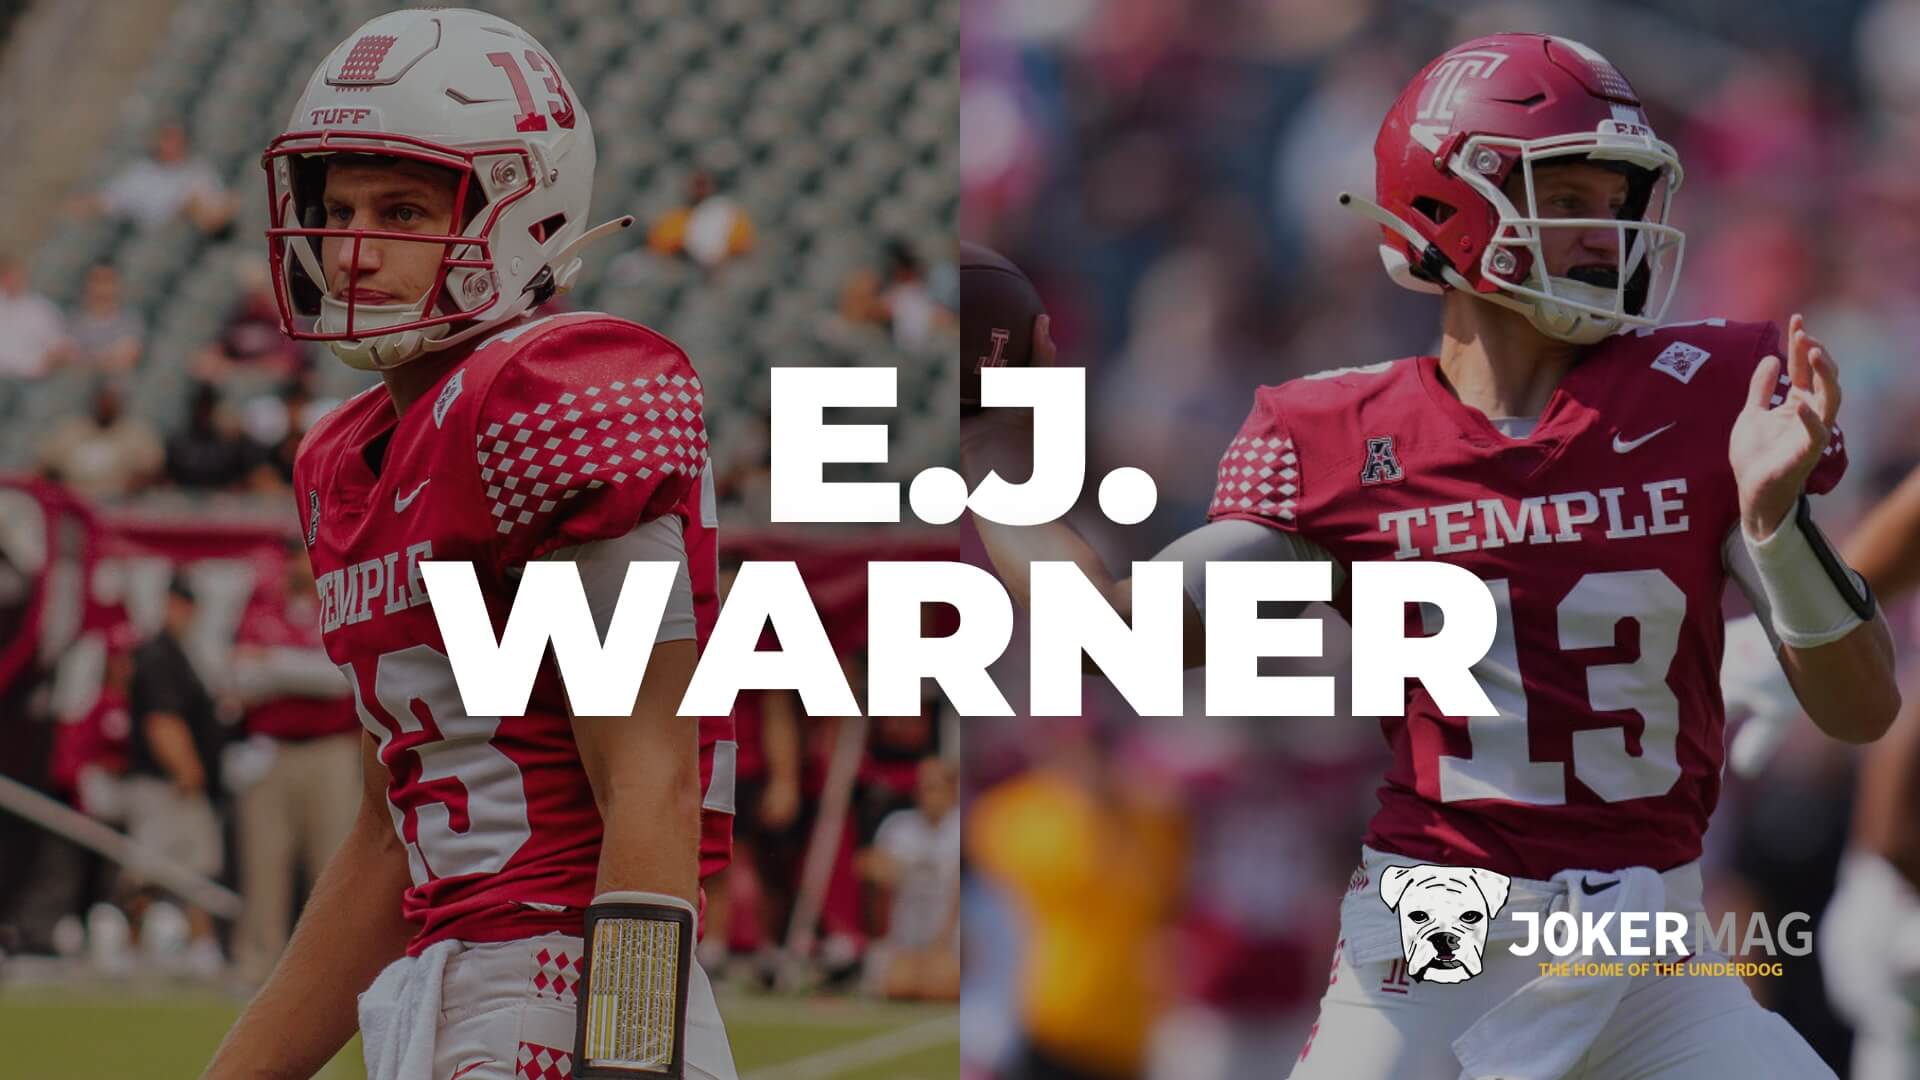 Freshman quarterback E.J. Warner is writing his own underdog story with the Temple Owls